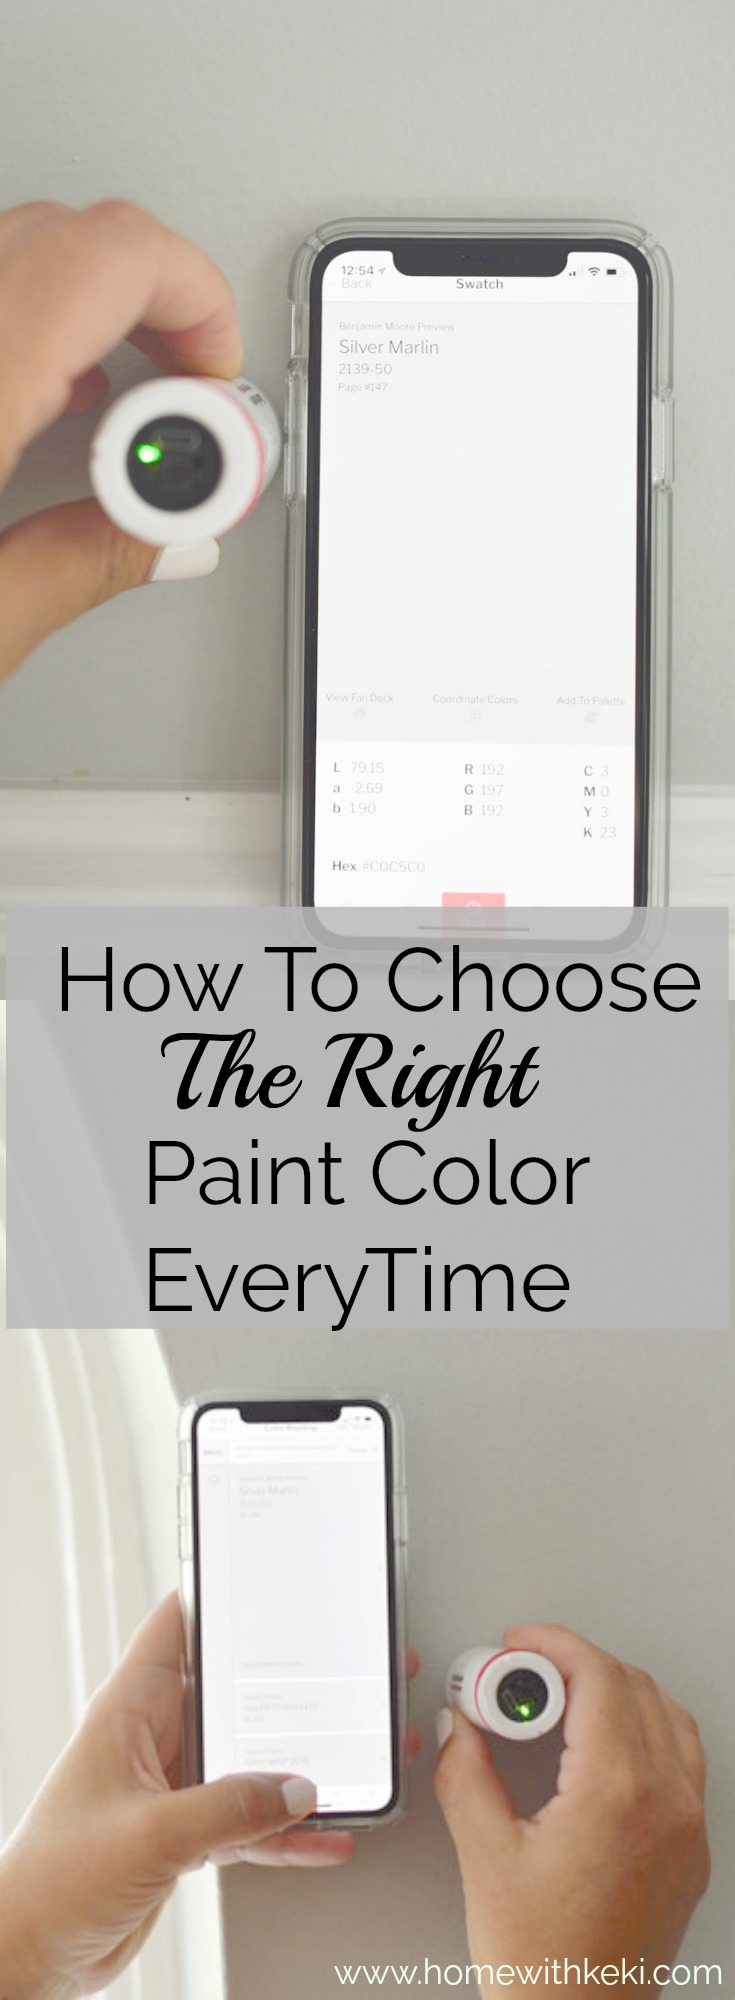 Discovered the must have paint tool to help you choose paint colors for any space, for more visit www.homewithkeki.com #paintcolors #paintingtips #interiors